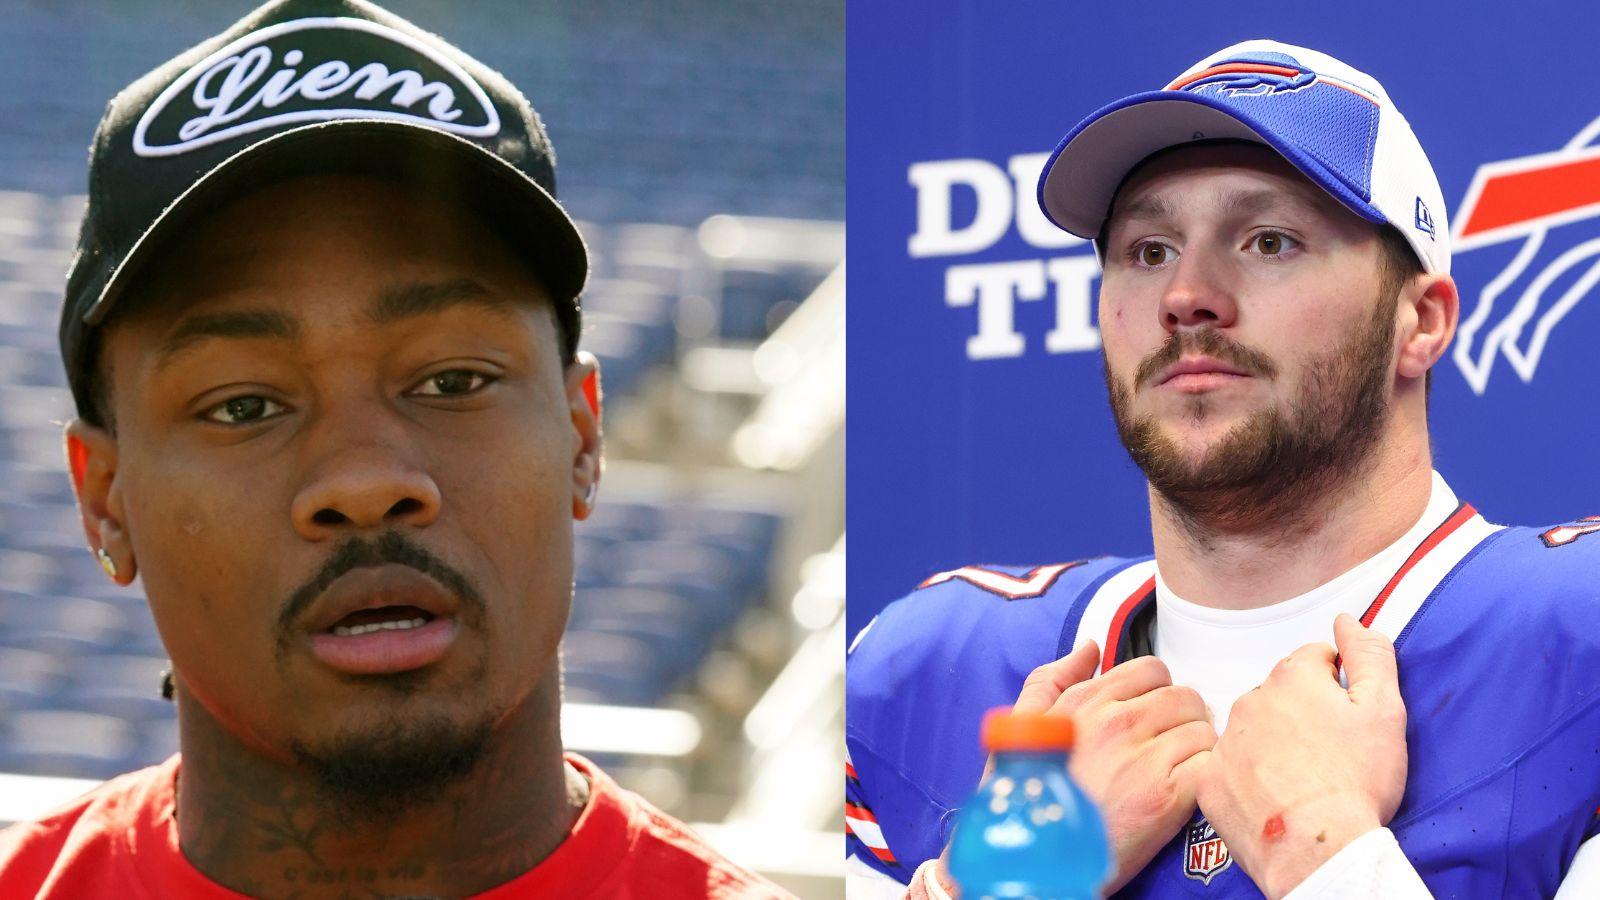 Stefon Diggs (left) and Josh Allen as a member of the Buffalo Bills (right).